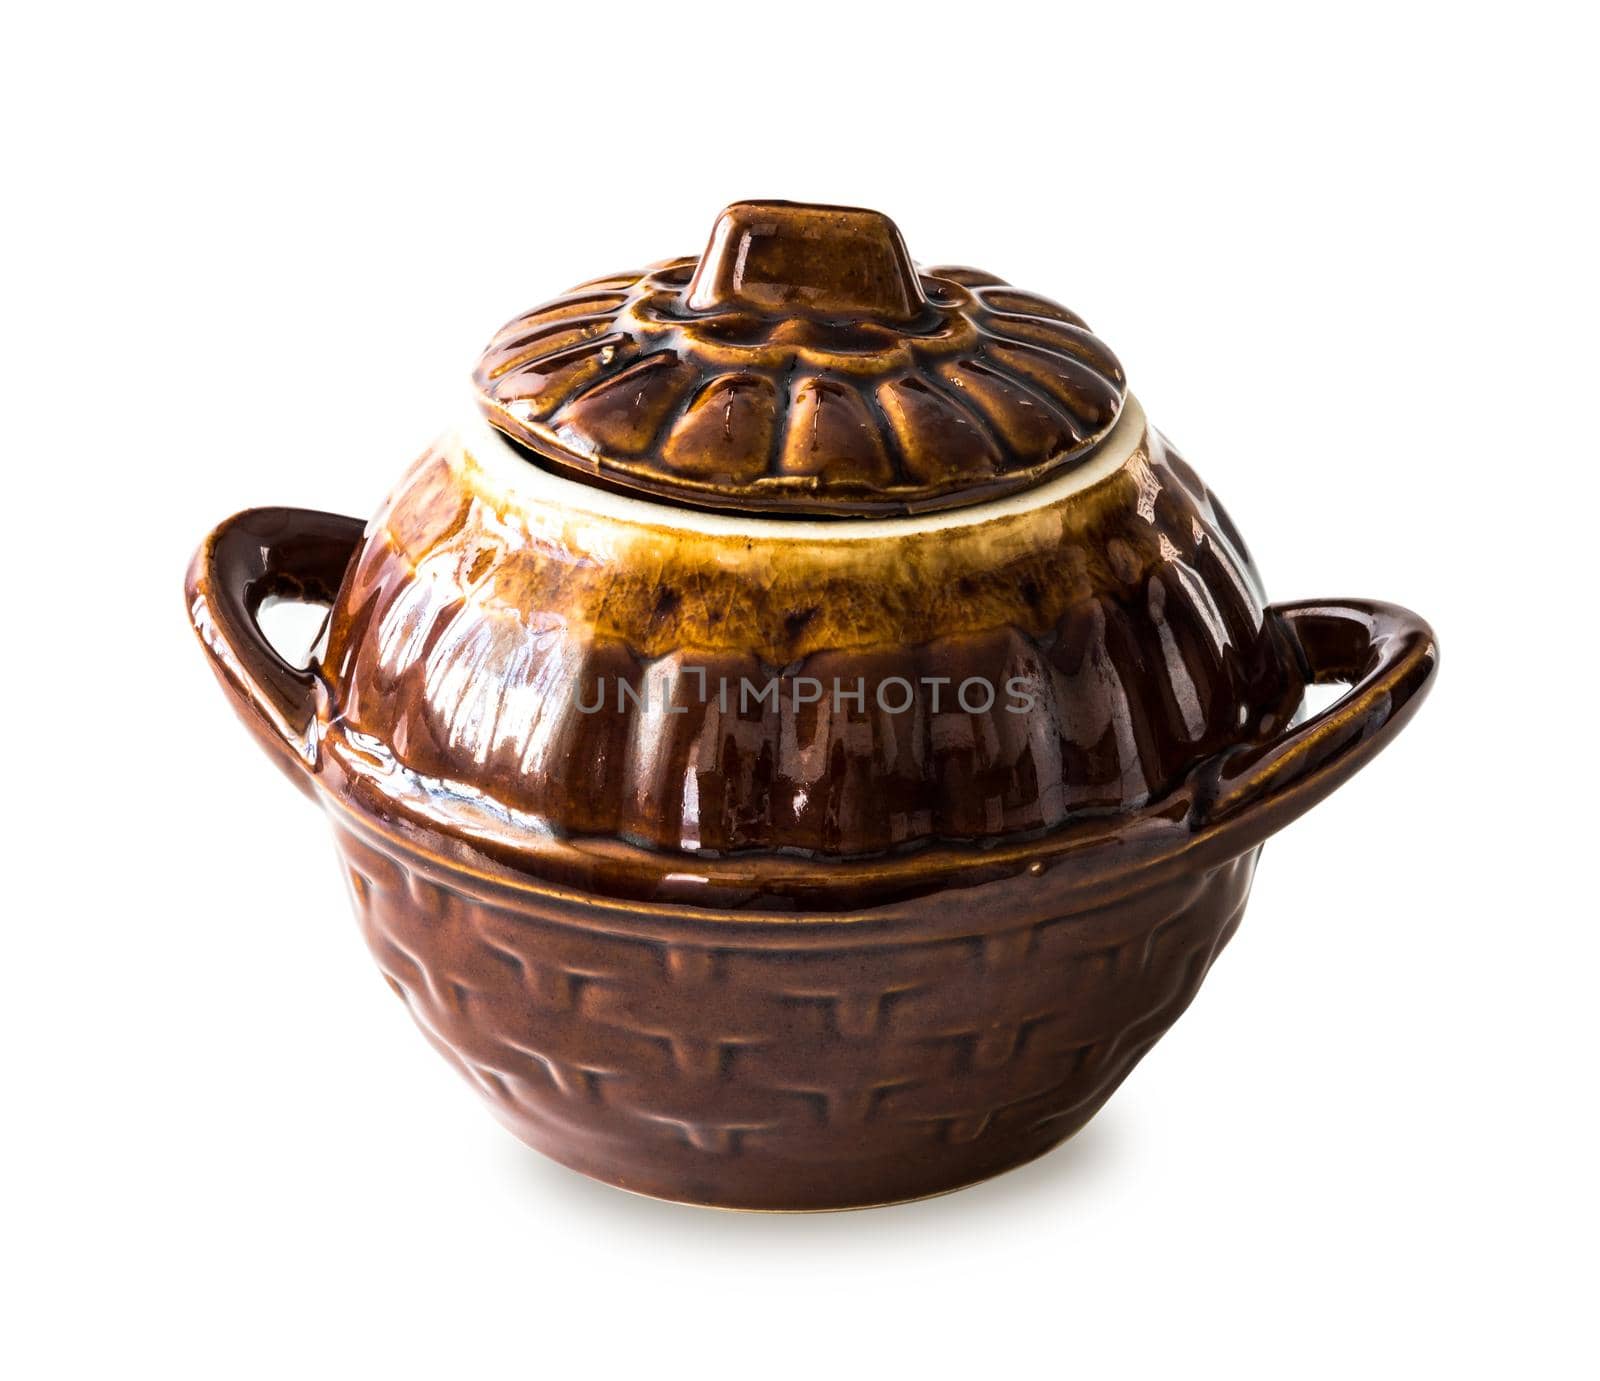 pottery bowl with handles and lid isolated on white background